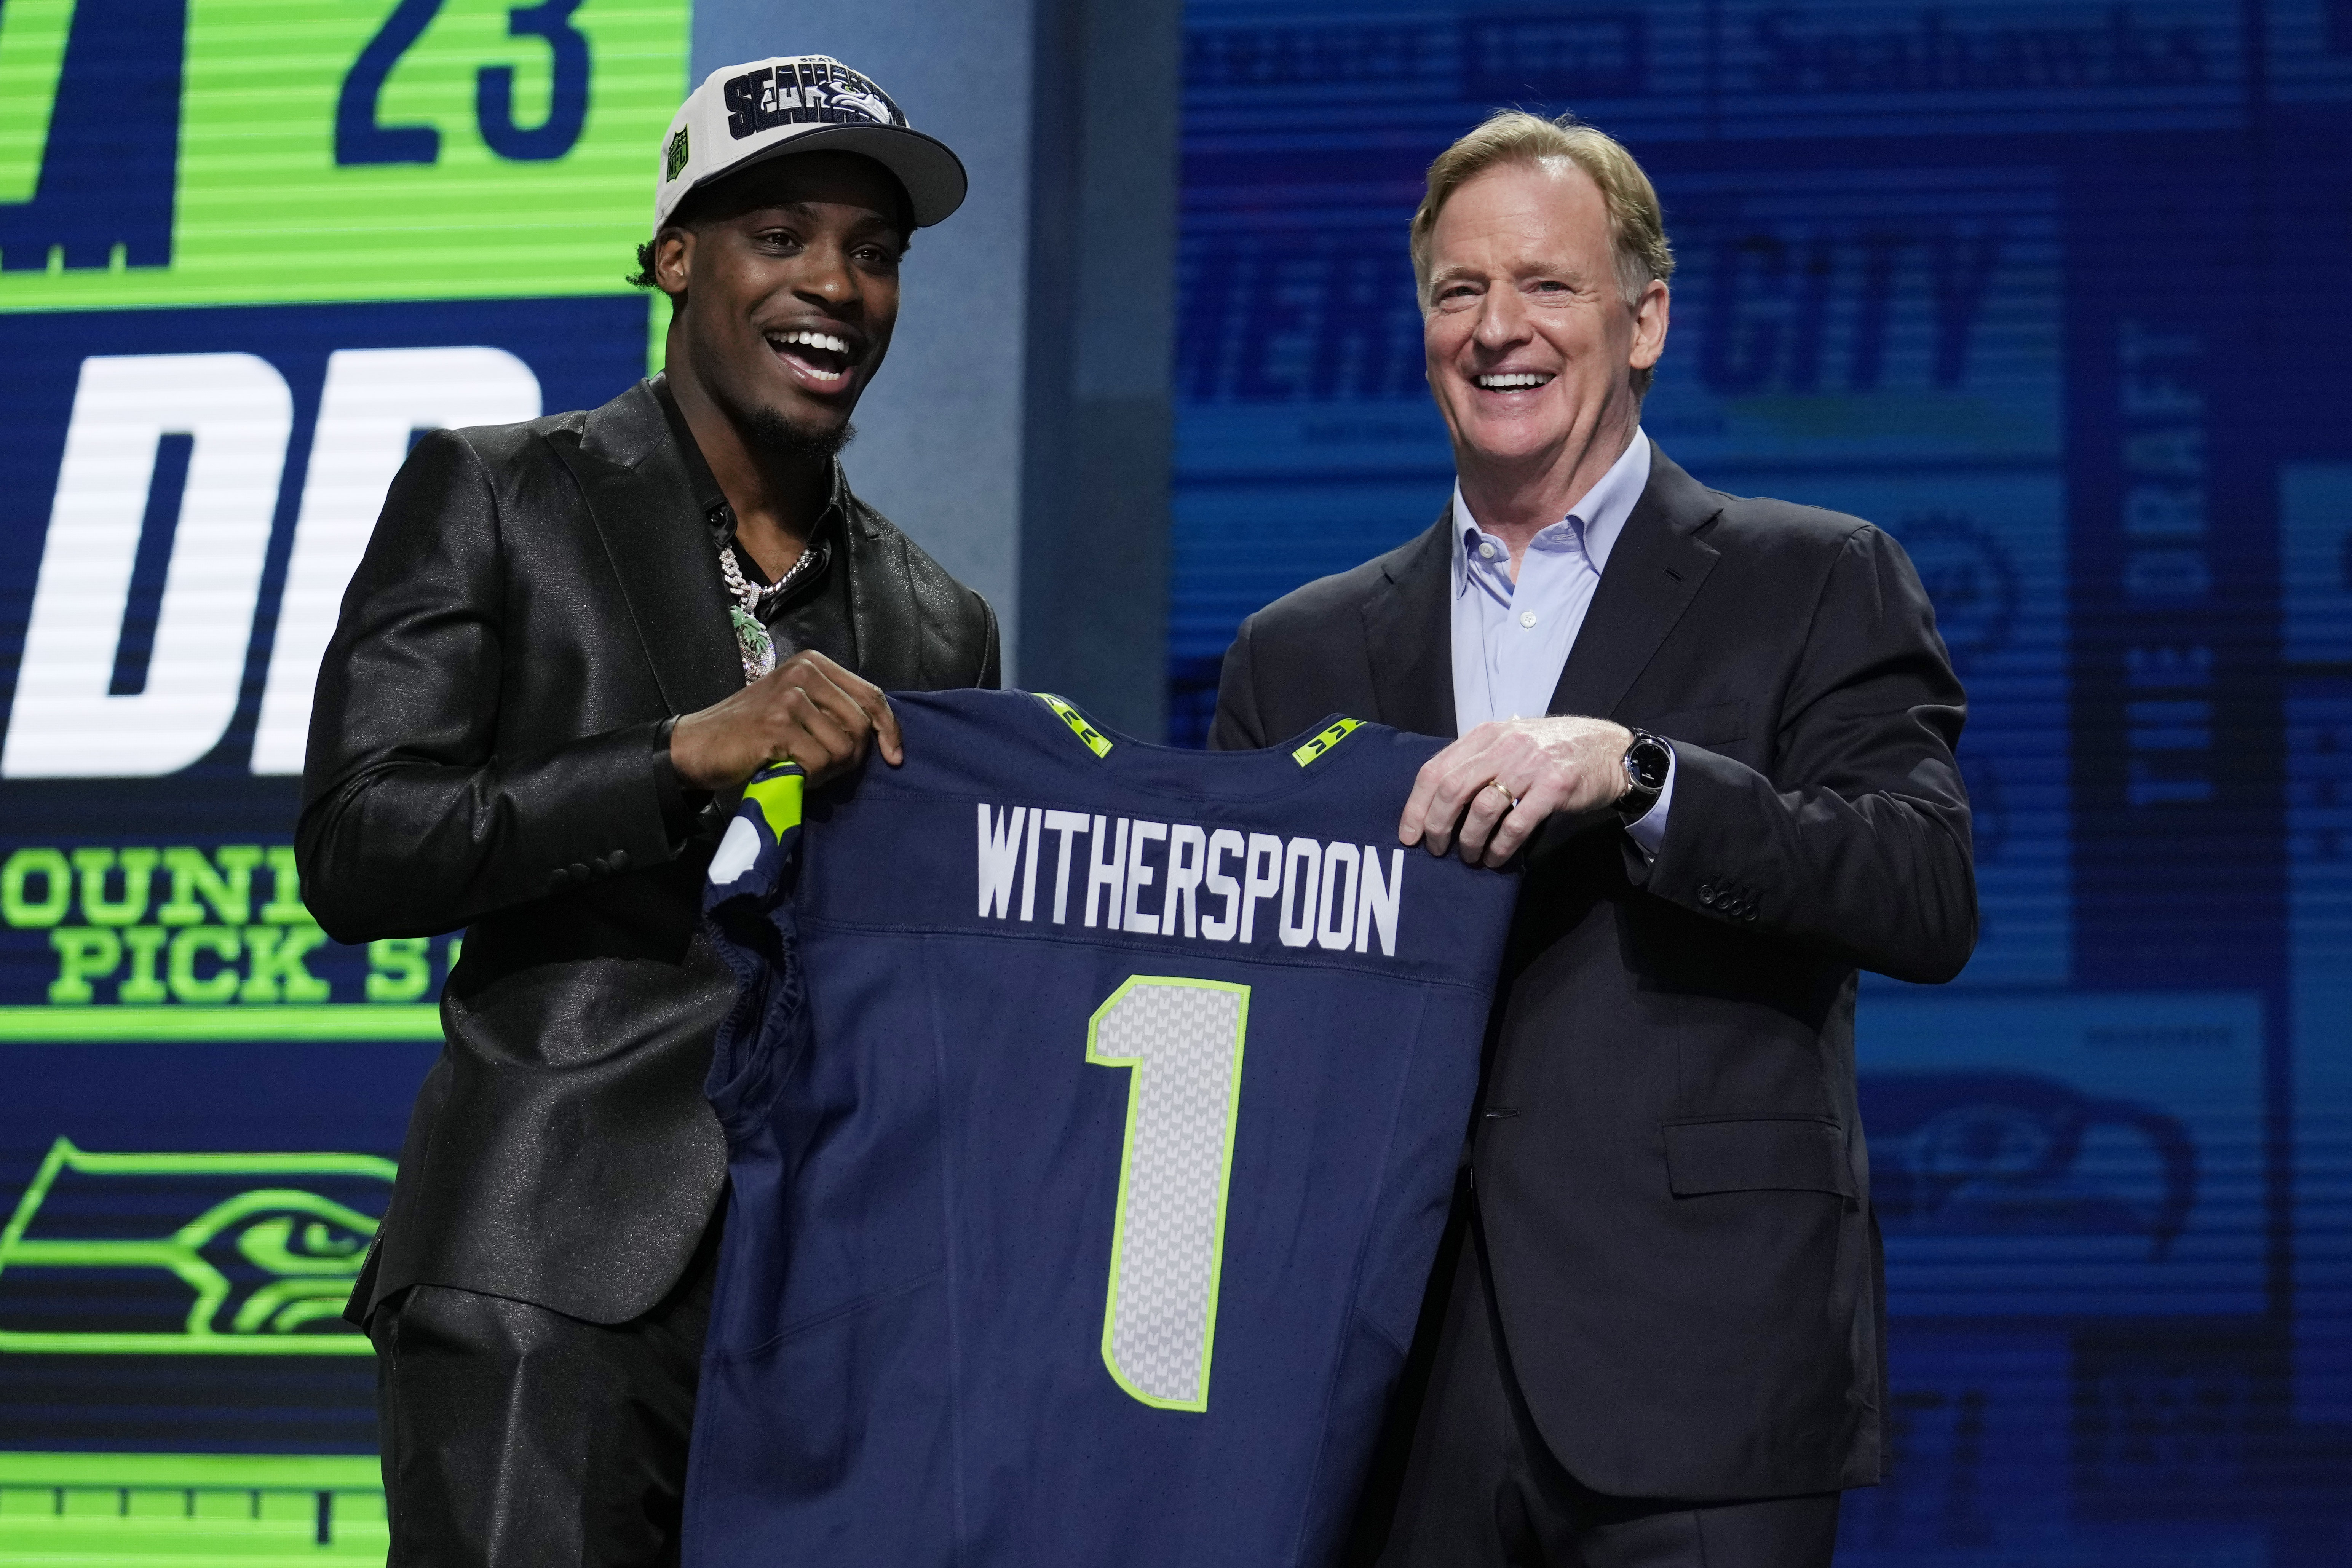 NFL Draft 2023: What we learned from Round 1 includes Eagles loving Georgia  players, Seahawks in win-now mode 